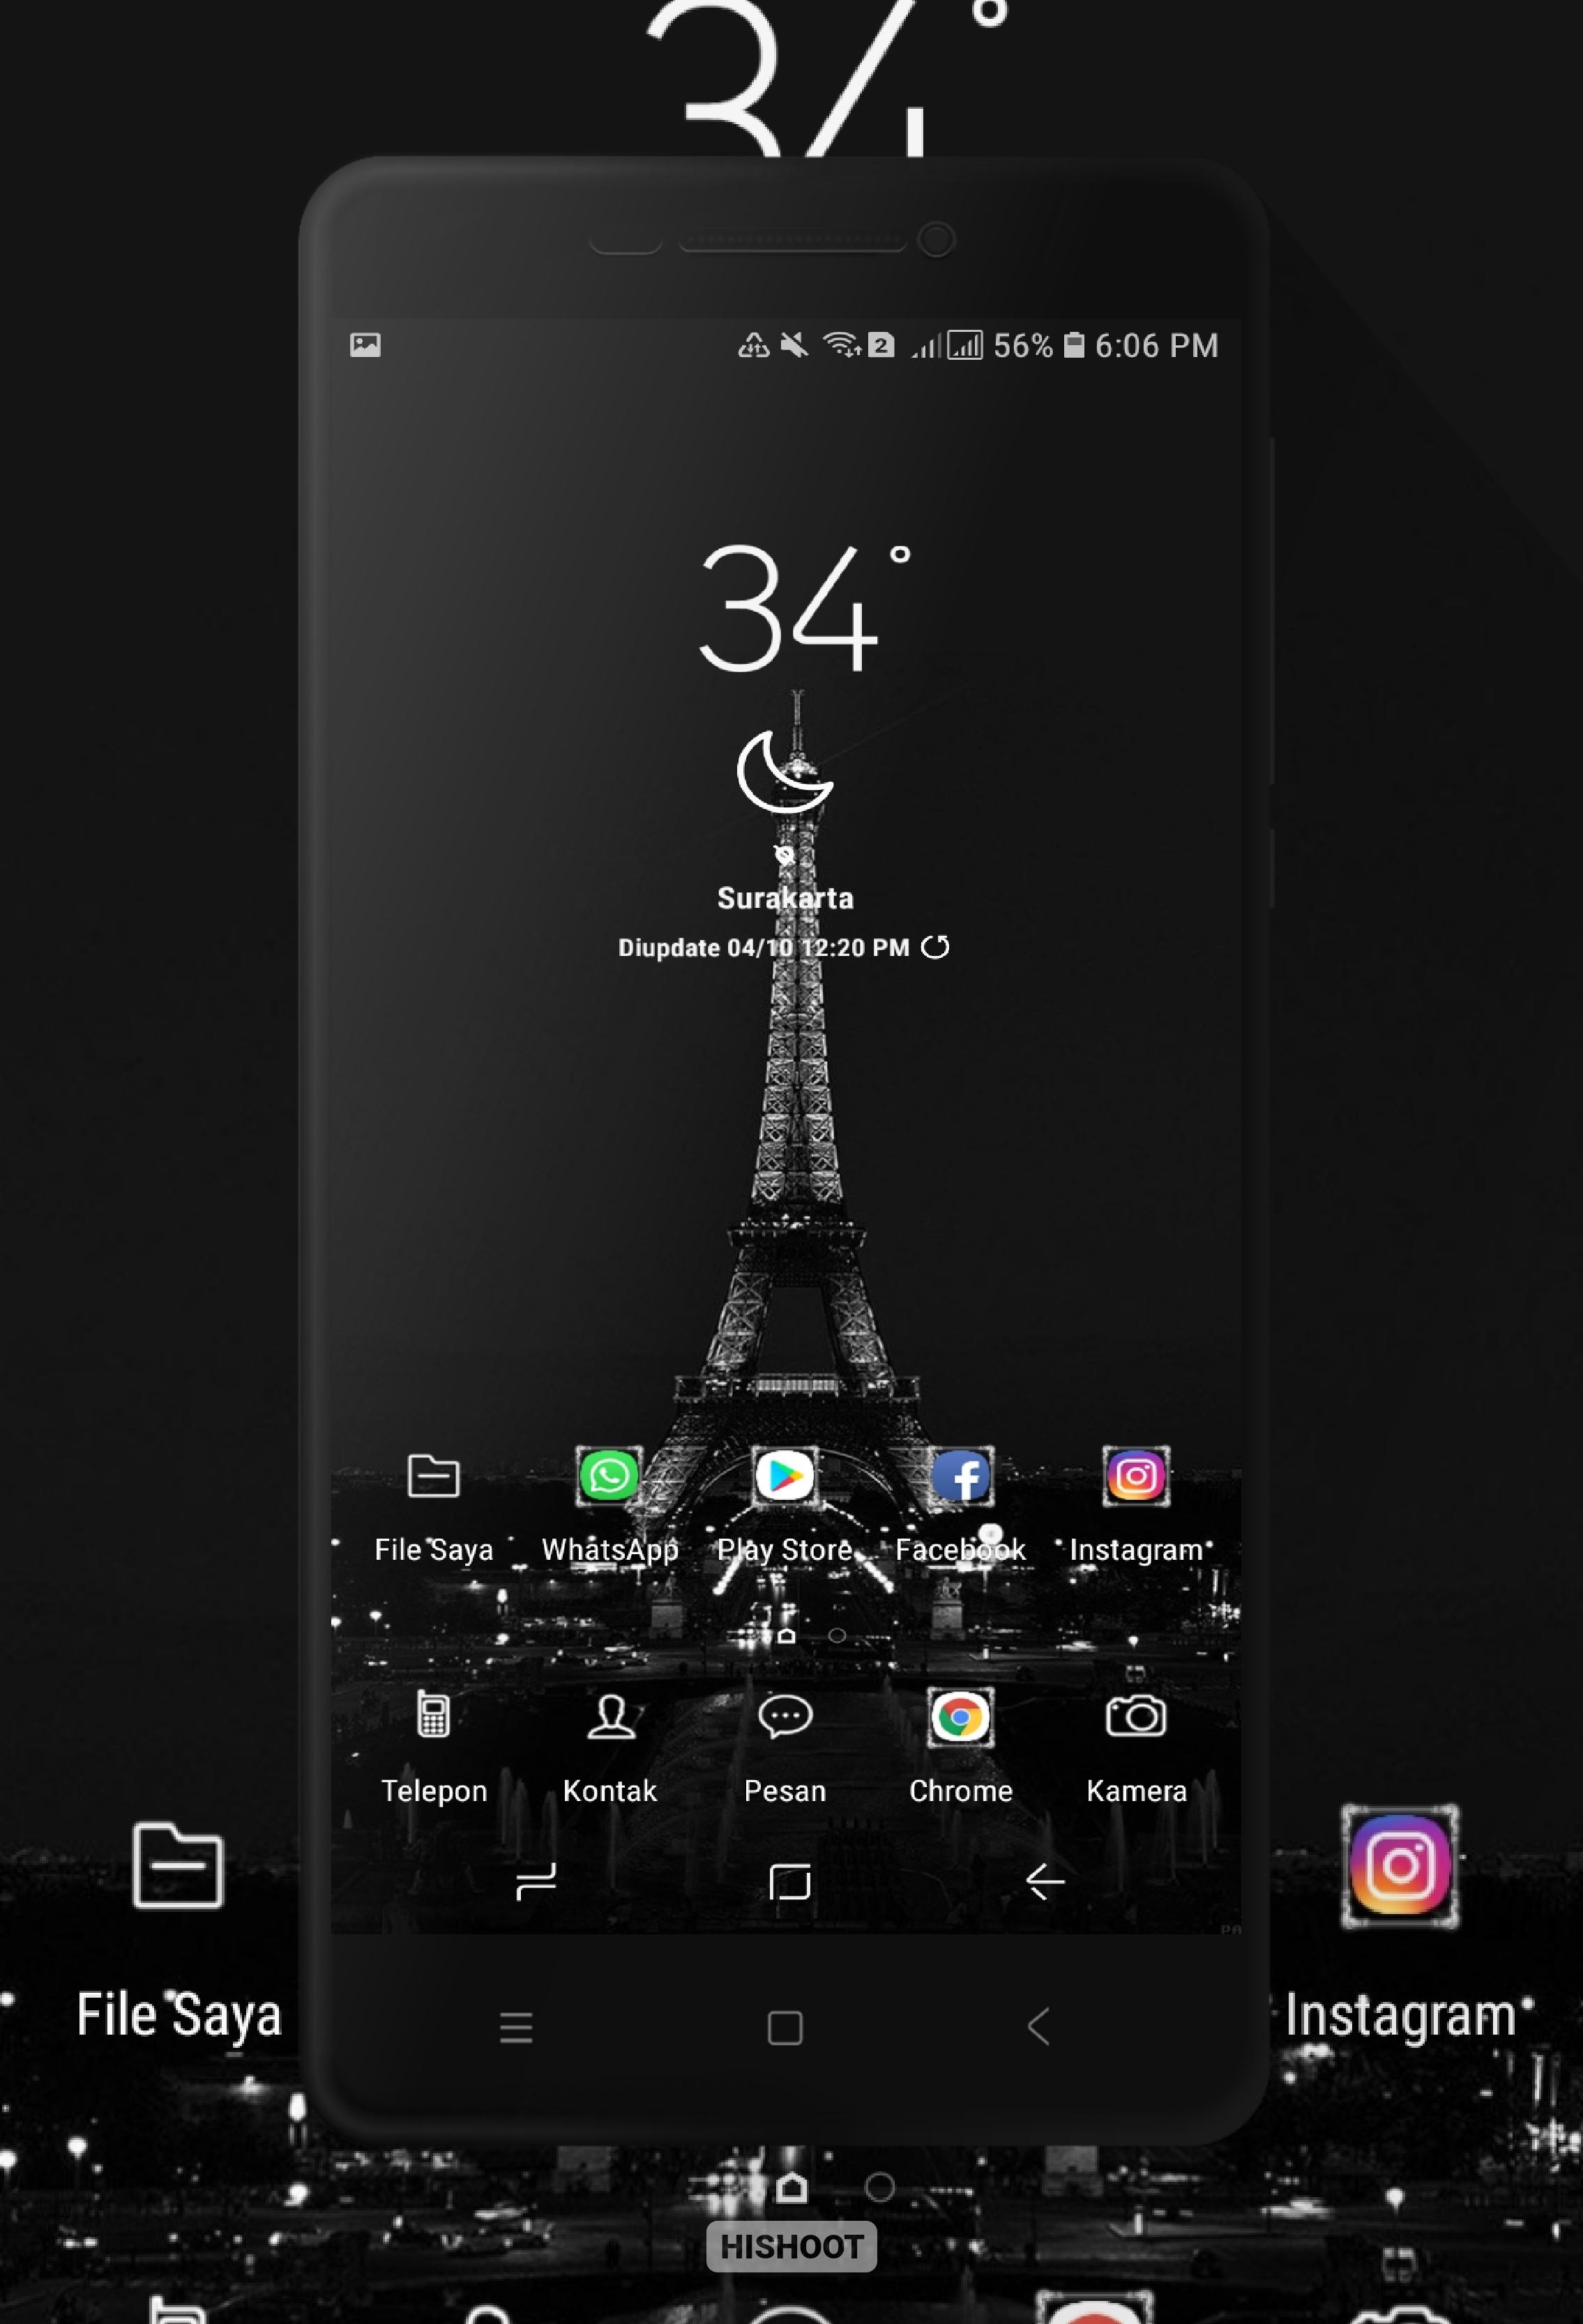 Dark Wallpaper for Android - APK Download